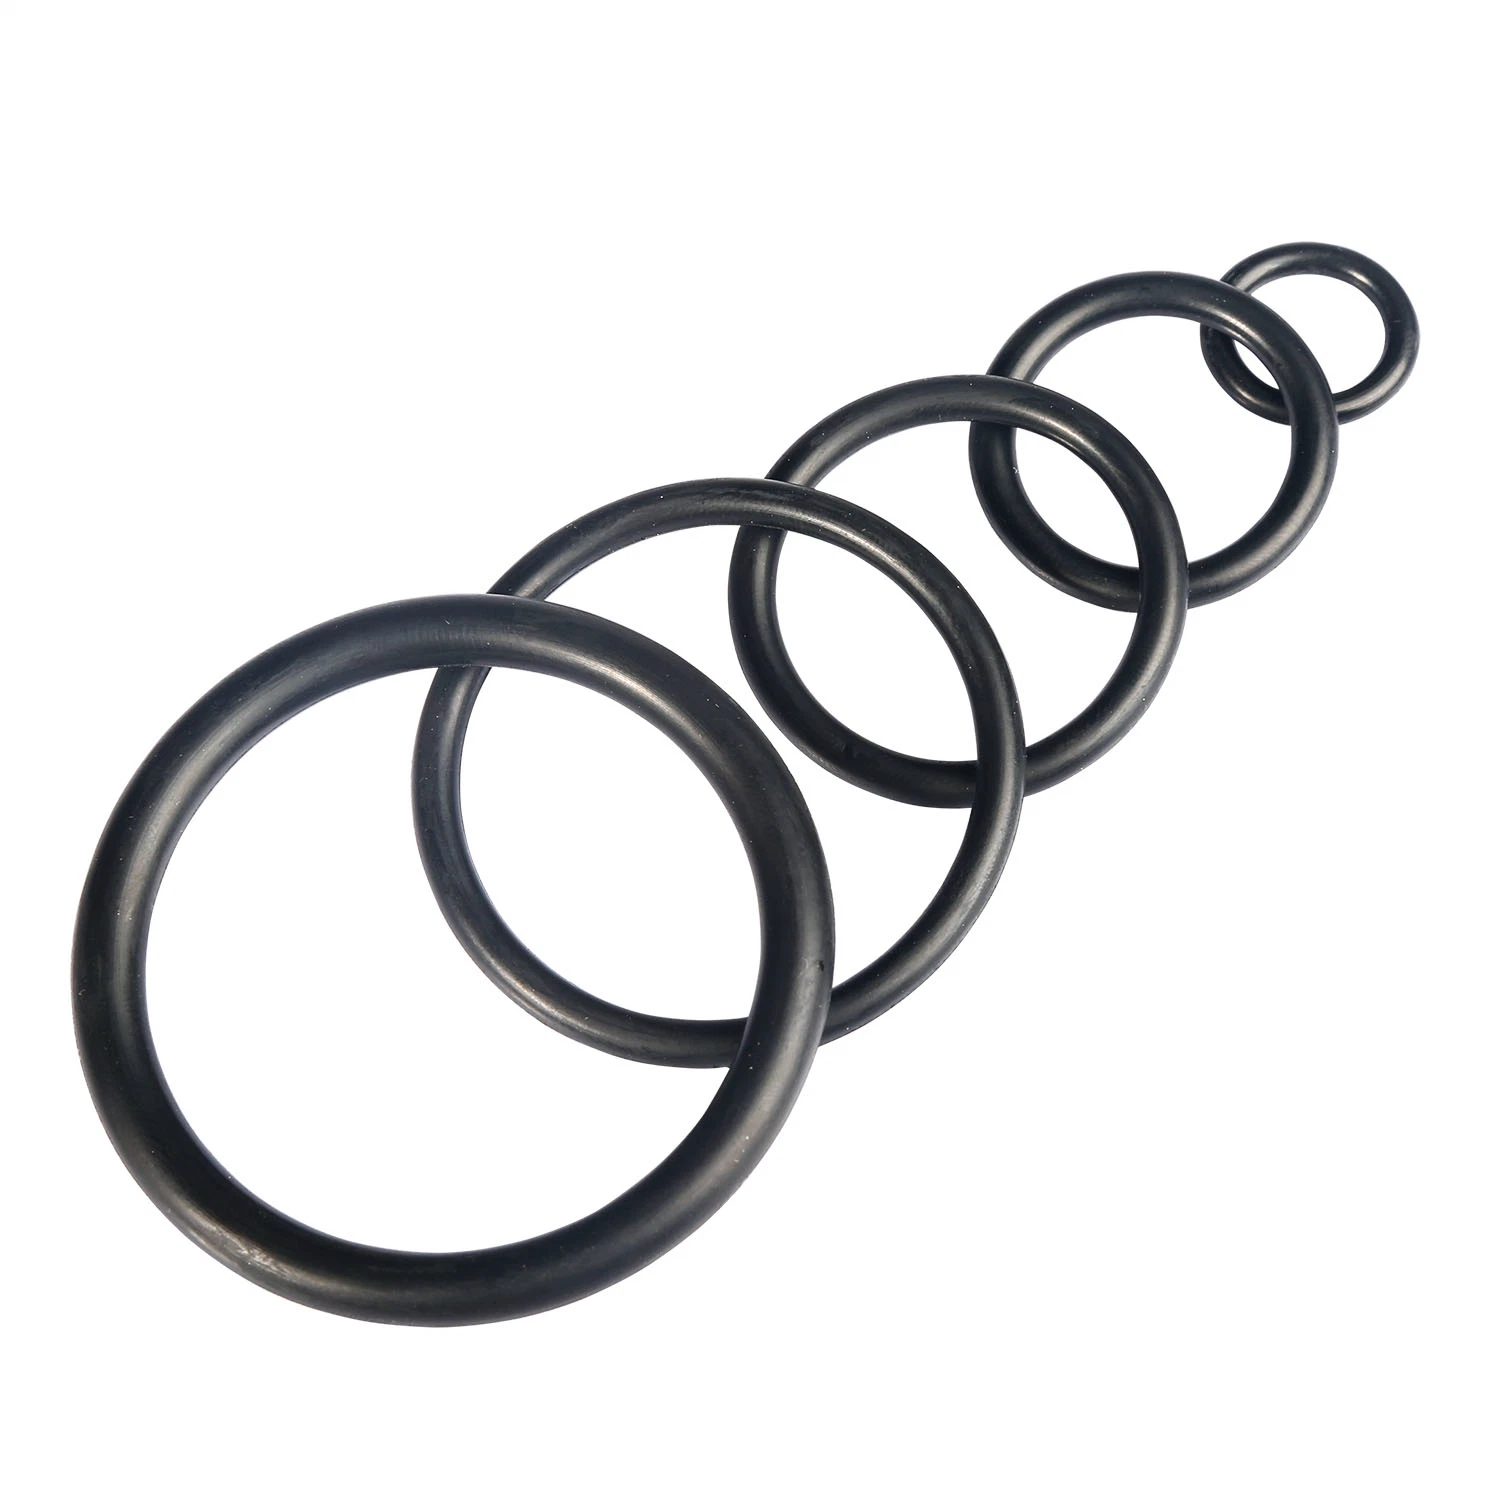 OEM NBR EPDM FKM Cr Silicone Rubber Sealing Rubber Oring